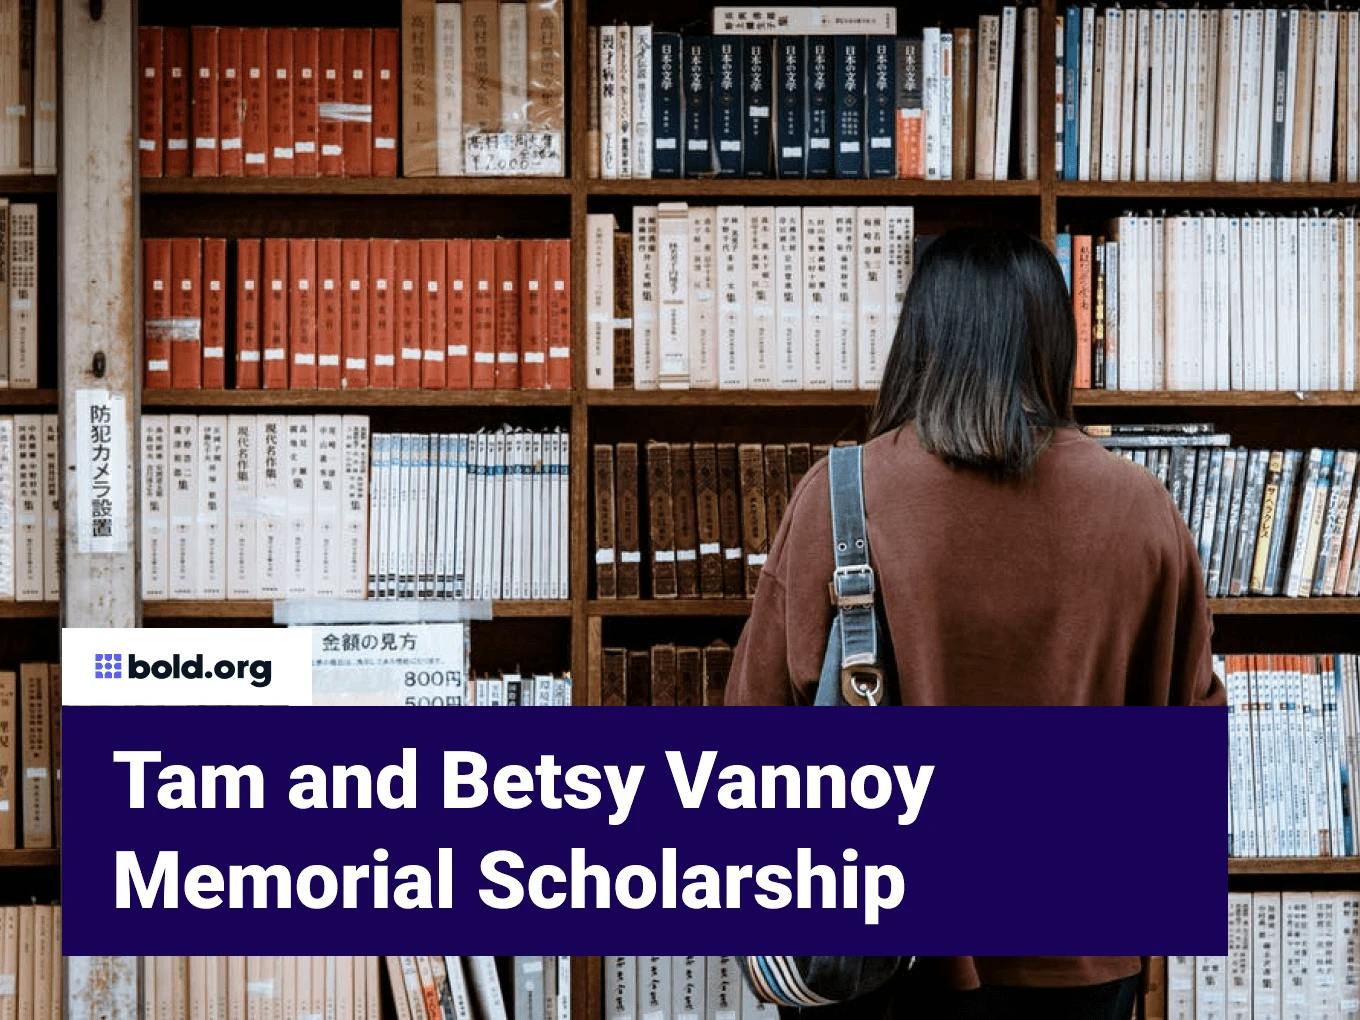 Tam and Betsy Vannoy Memorial Scholarship